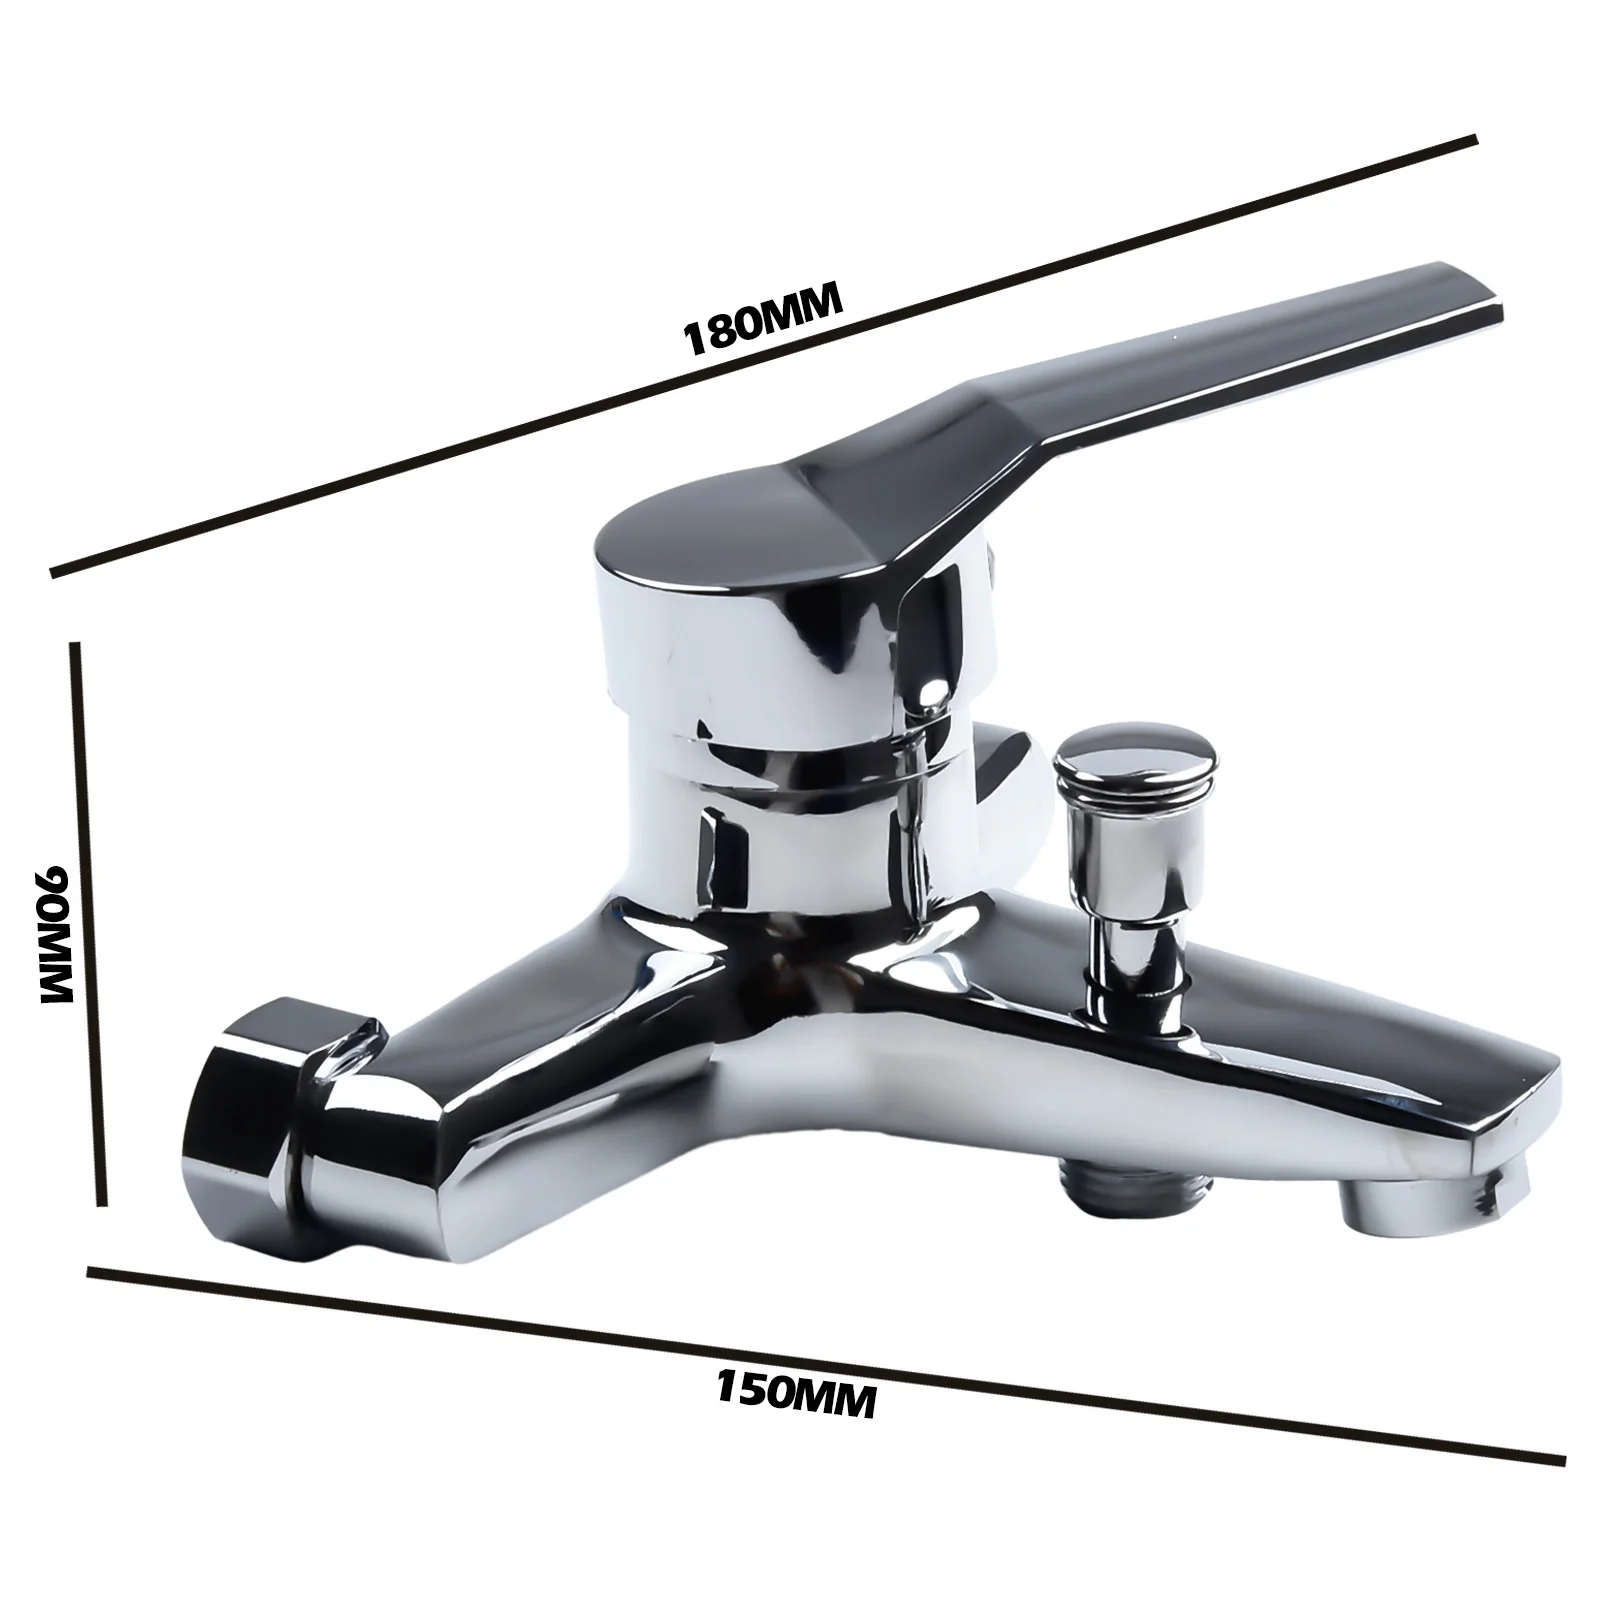 

Tap Basin Faucets Bathroom Tap Hot&Cold Water Mixer Tap Lead-free Mixer Tap Wall Mounted Zinc Alloy Basin Faucets